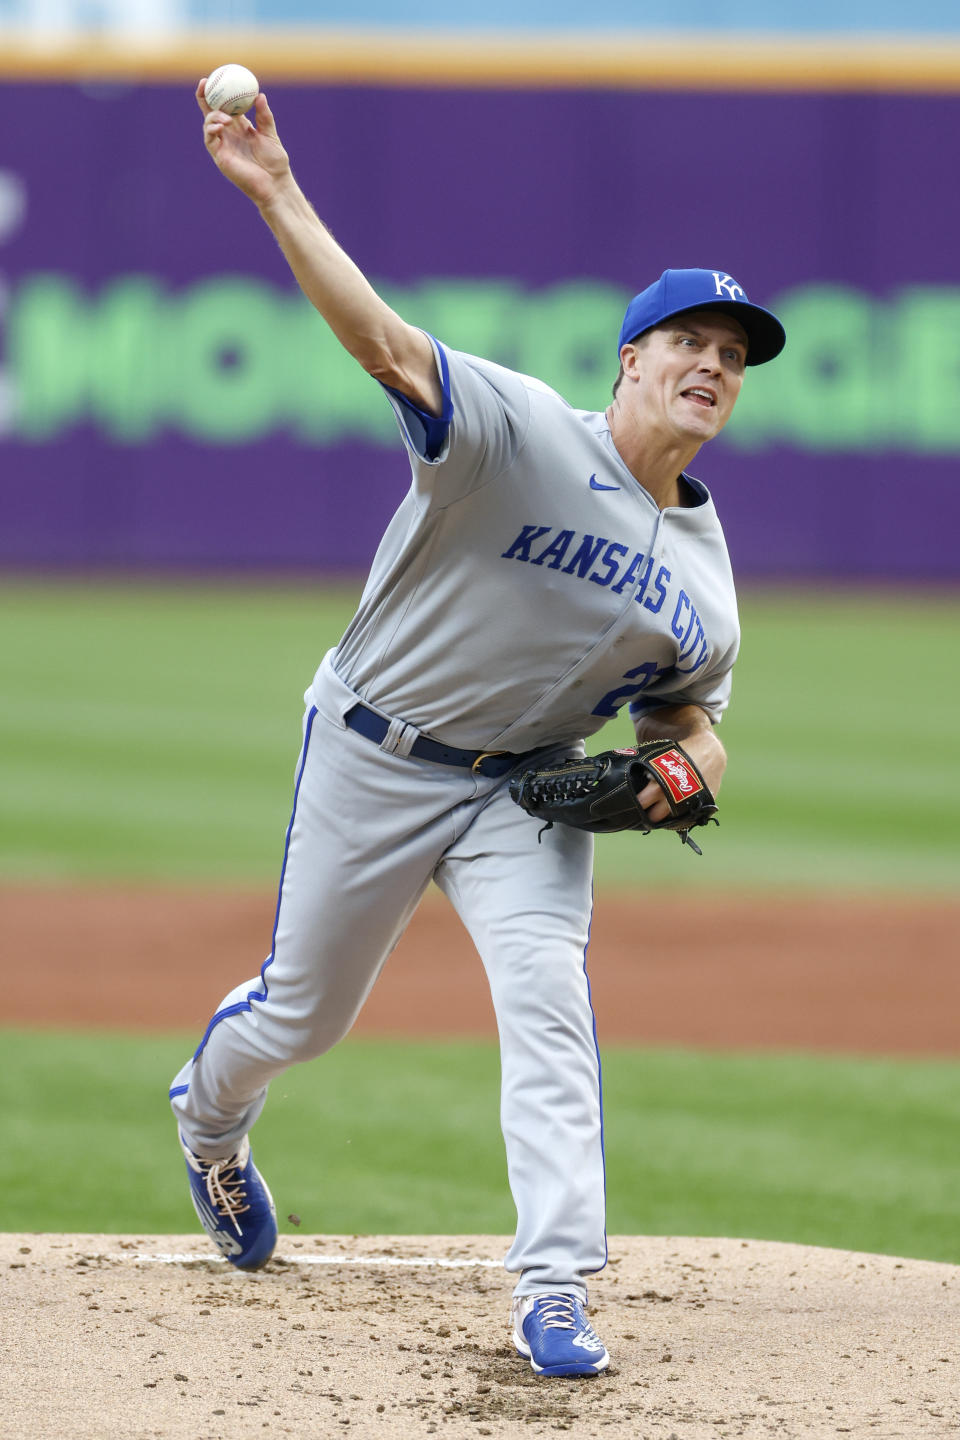 Kansas City Royals starting pitcher Zack Greinke delivers against the Cleveland Guardians during the first inning of a baseball game, Monday, Oct. 3, 2022, in Cleveland. (AP Photo/Ron Schwane)